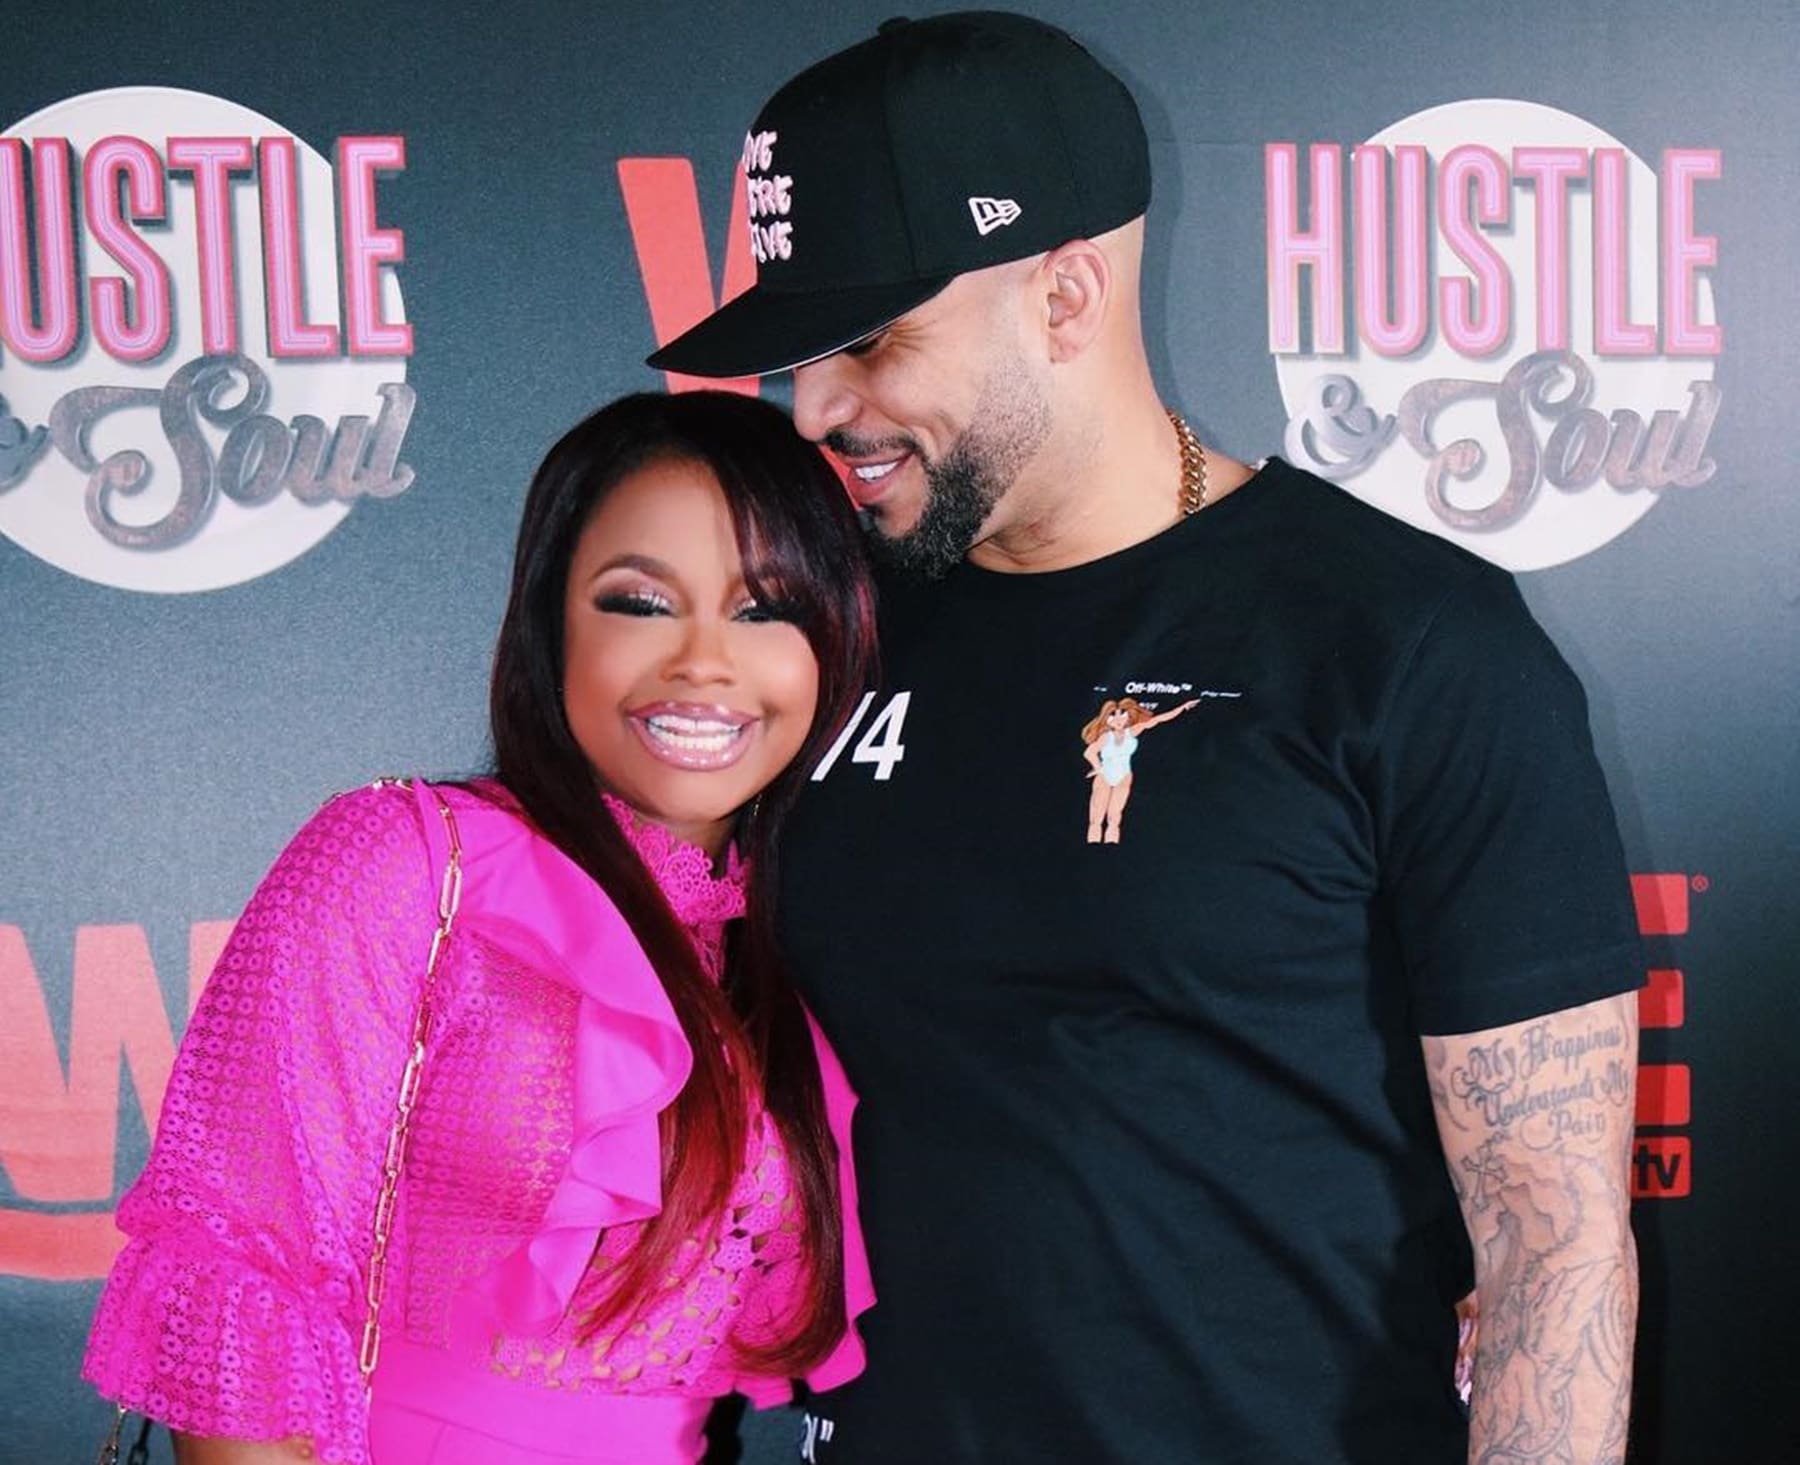 ”phaedra-parks-gets-in-a-controversy-about-light-skinned-men-like-tone-kapone-after-posting-romantic-pictures-tiny-harris-defends-former-rhoa-star”